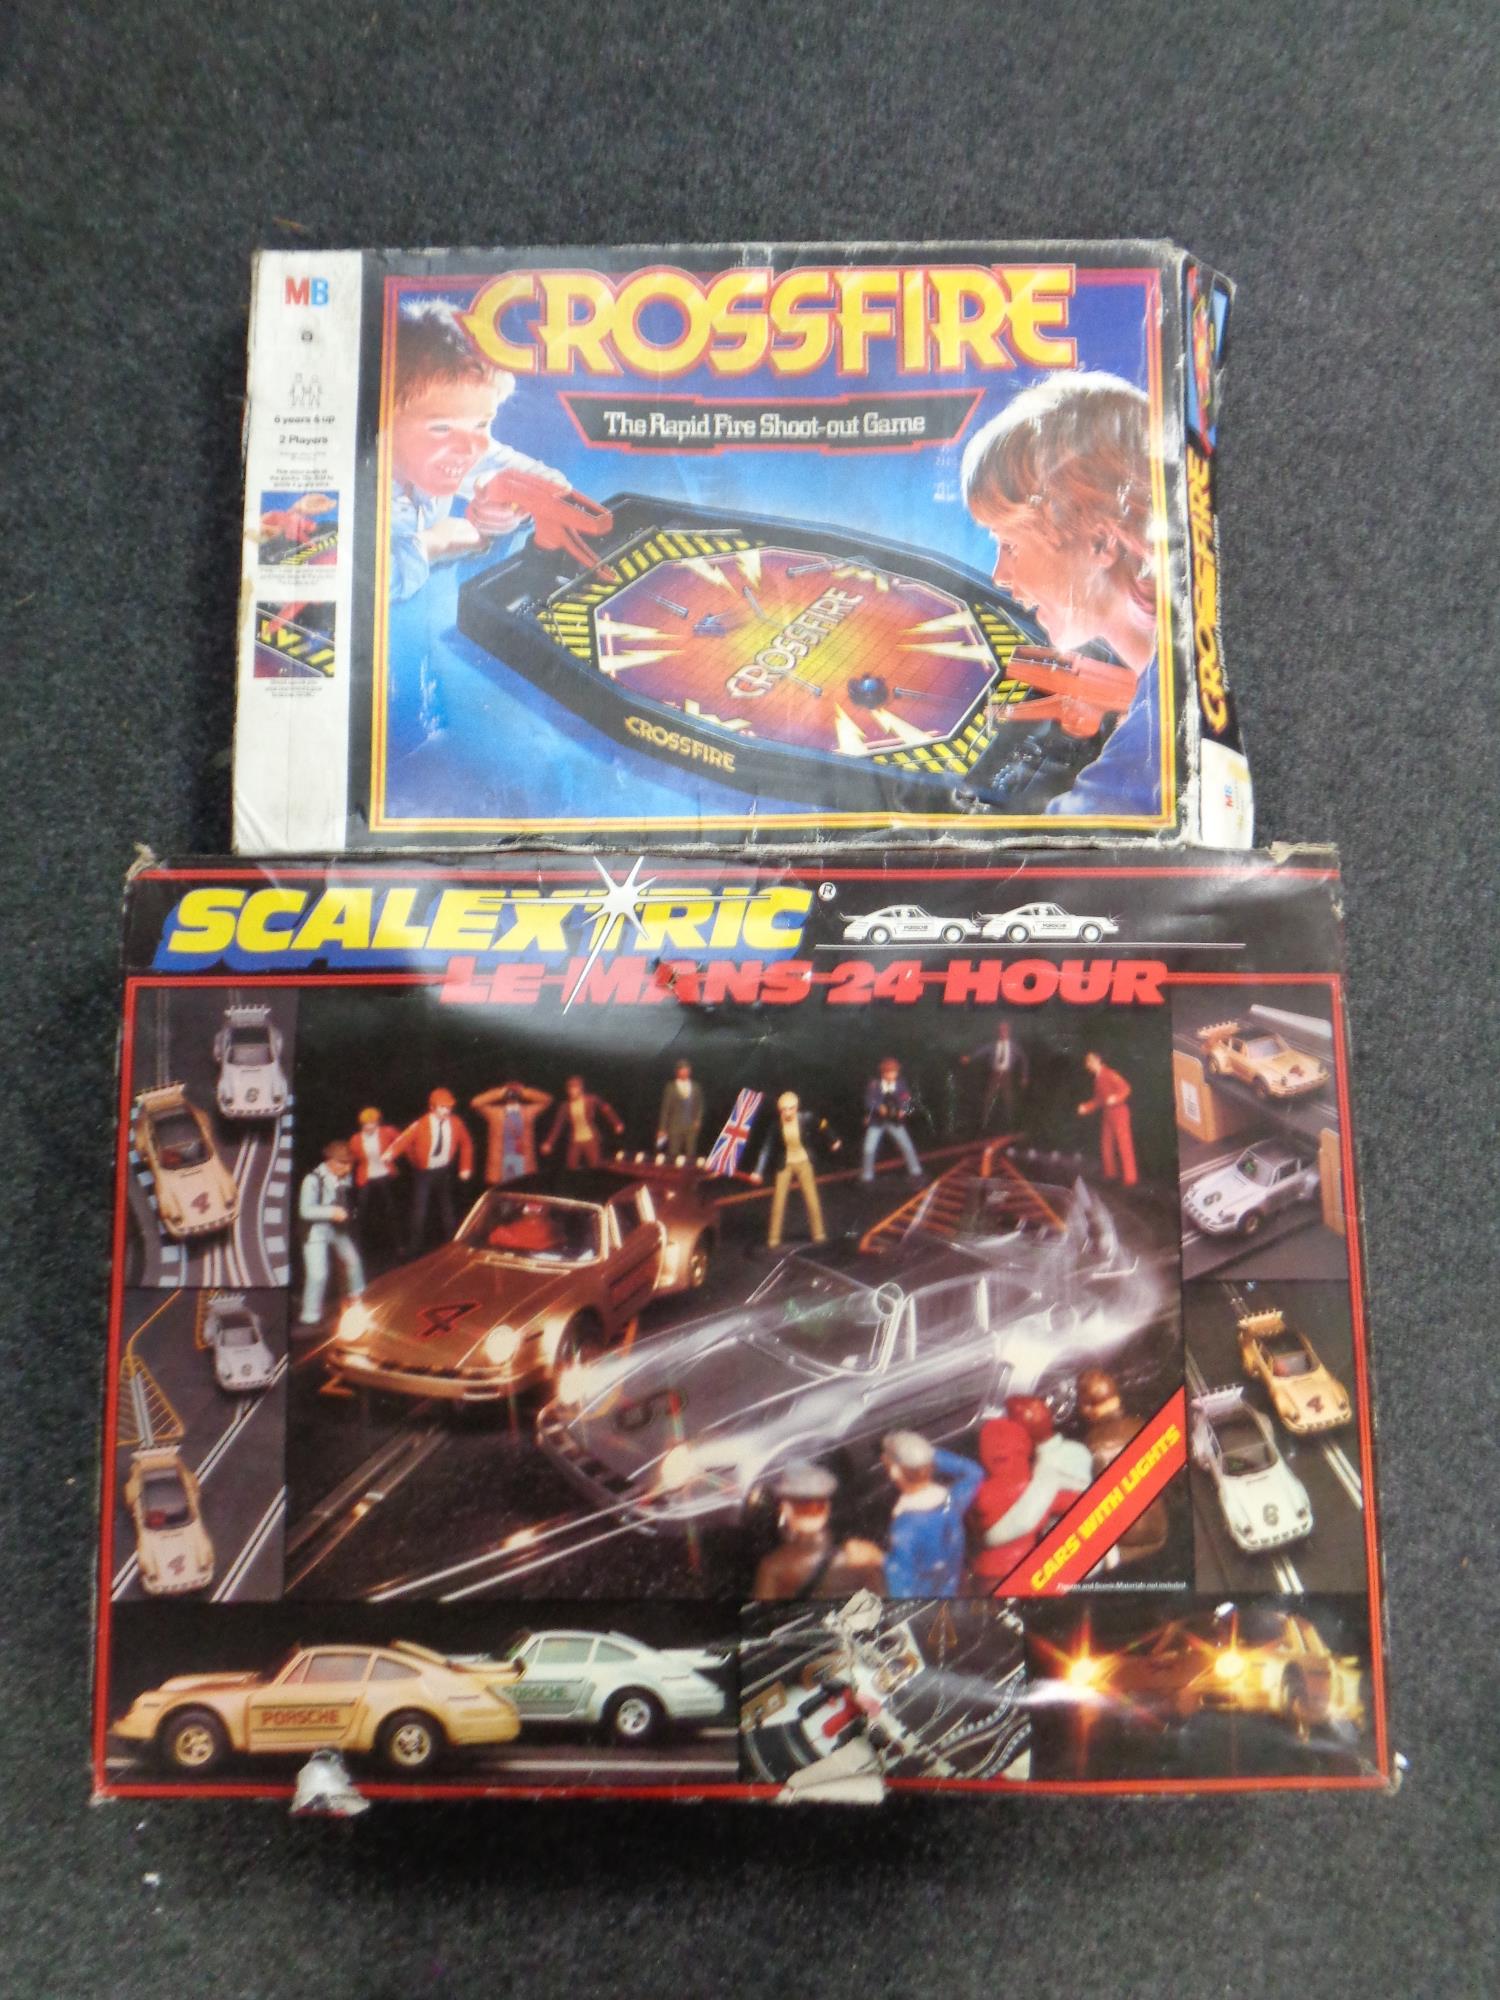 A Scalectrix Le Mans 24 Hour race set (no cars) and a vintage MB Crossfire game